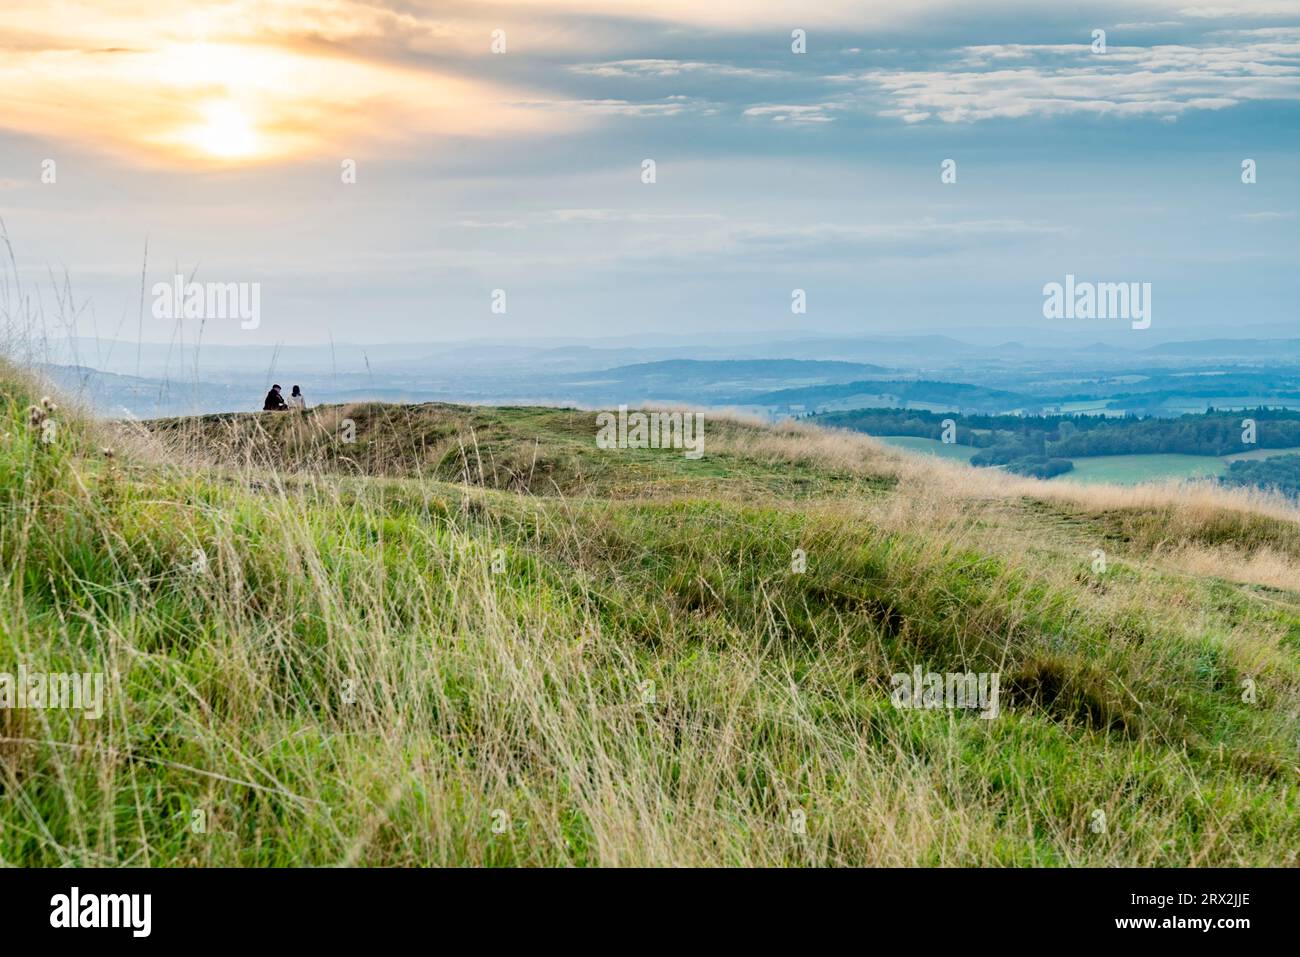 View from Pathway leading,down,from the summit of Herefordshire Beacon, the Iron Age hill fort,looking towards Wales and the setting sun. Stock Photo